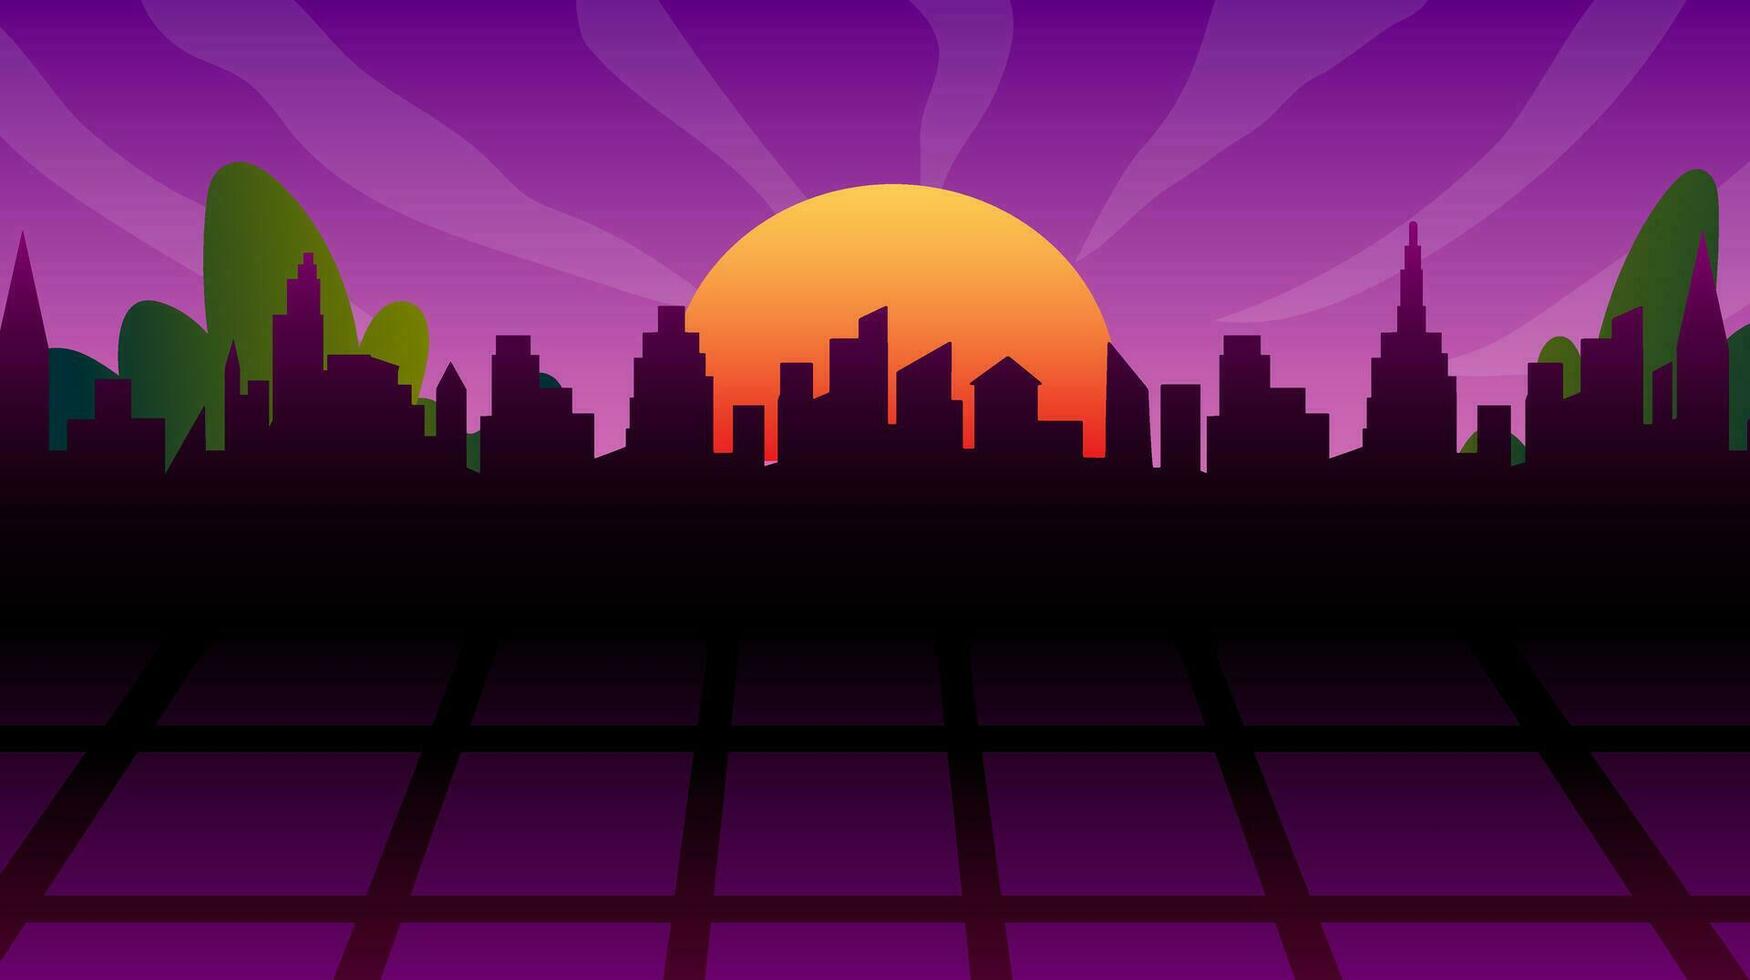 Futuristic night city. Cityscape on a purple background with sunset. Wide city front perspective view. Cyberpunk and retro wave style illustration. vector